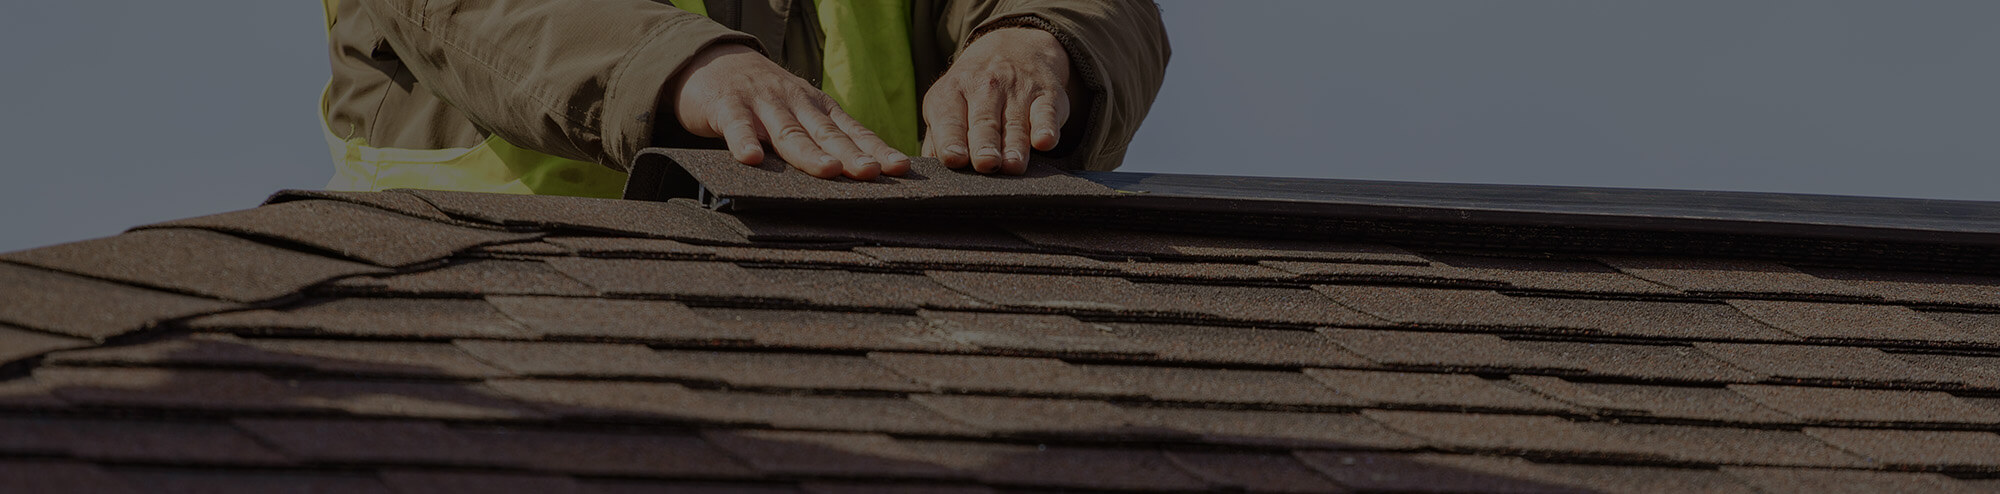 Oshkosh roofing contractors providing affordable roof replacement